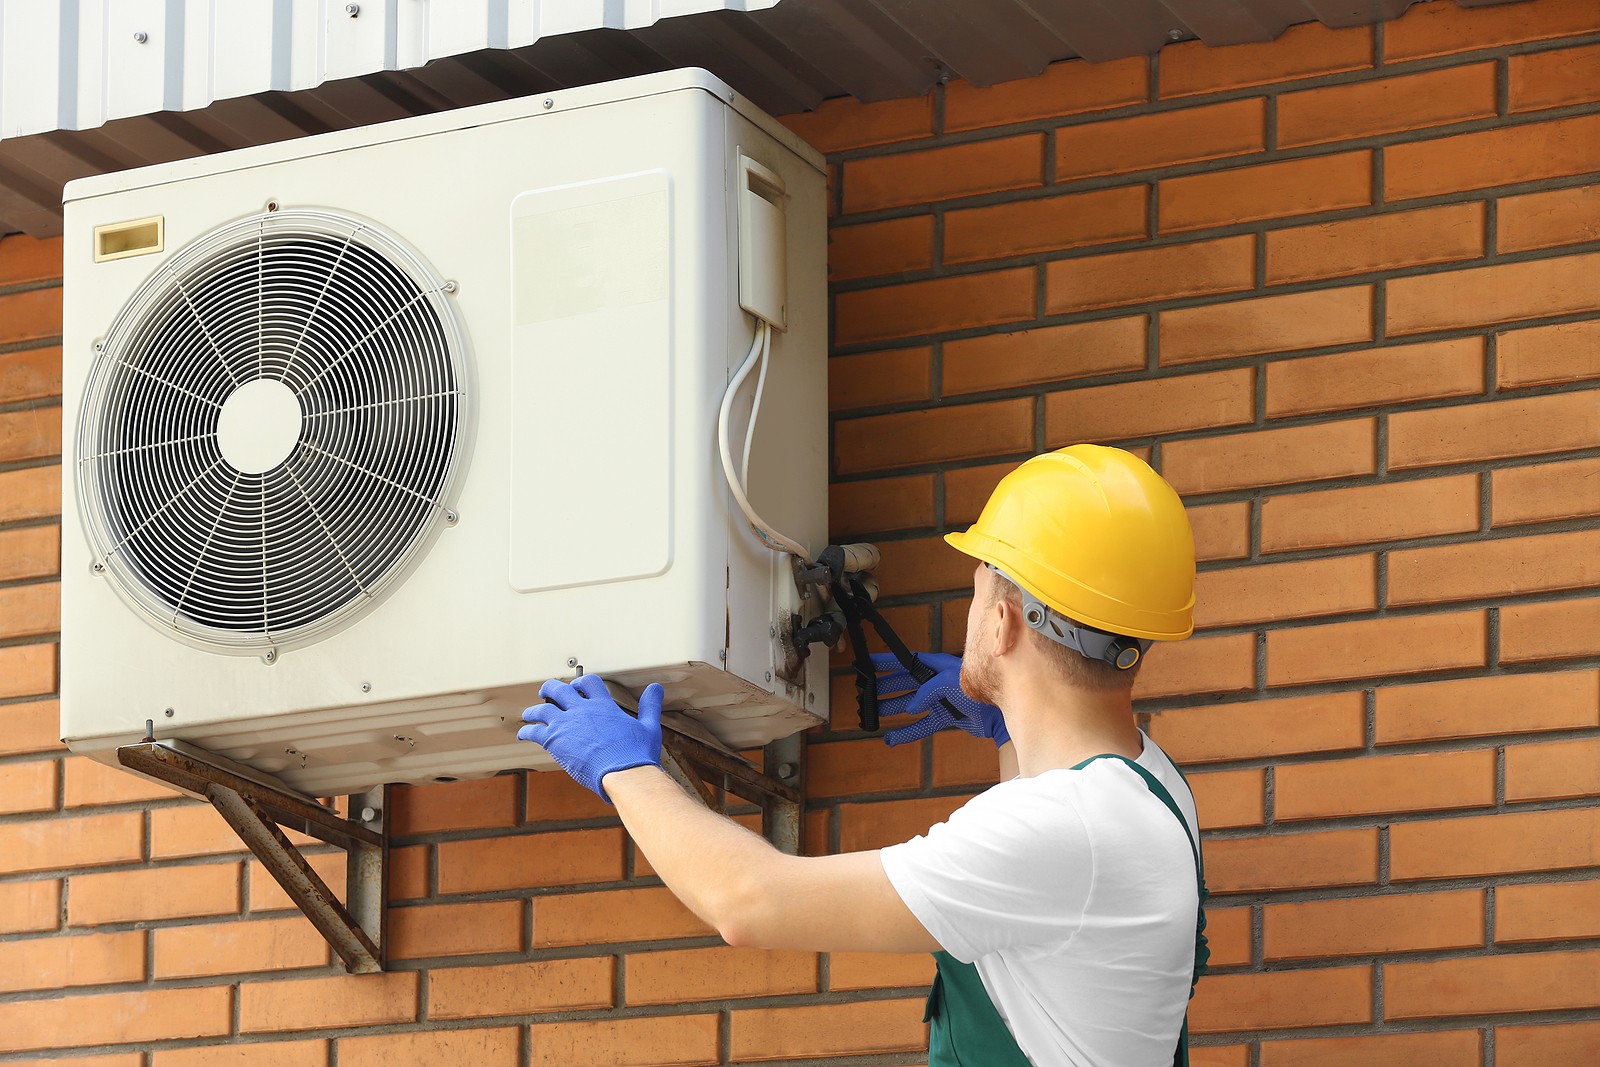 How Does an Air Conditioner Warranty Work?